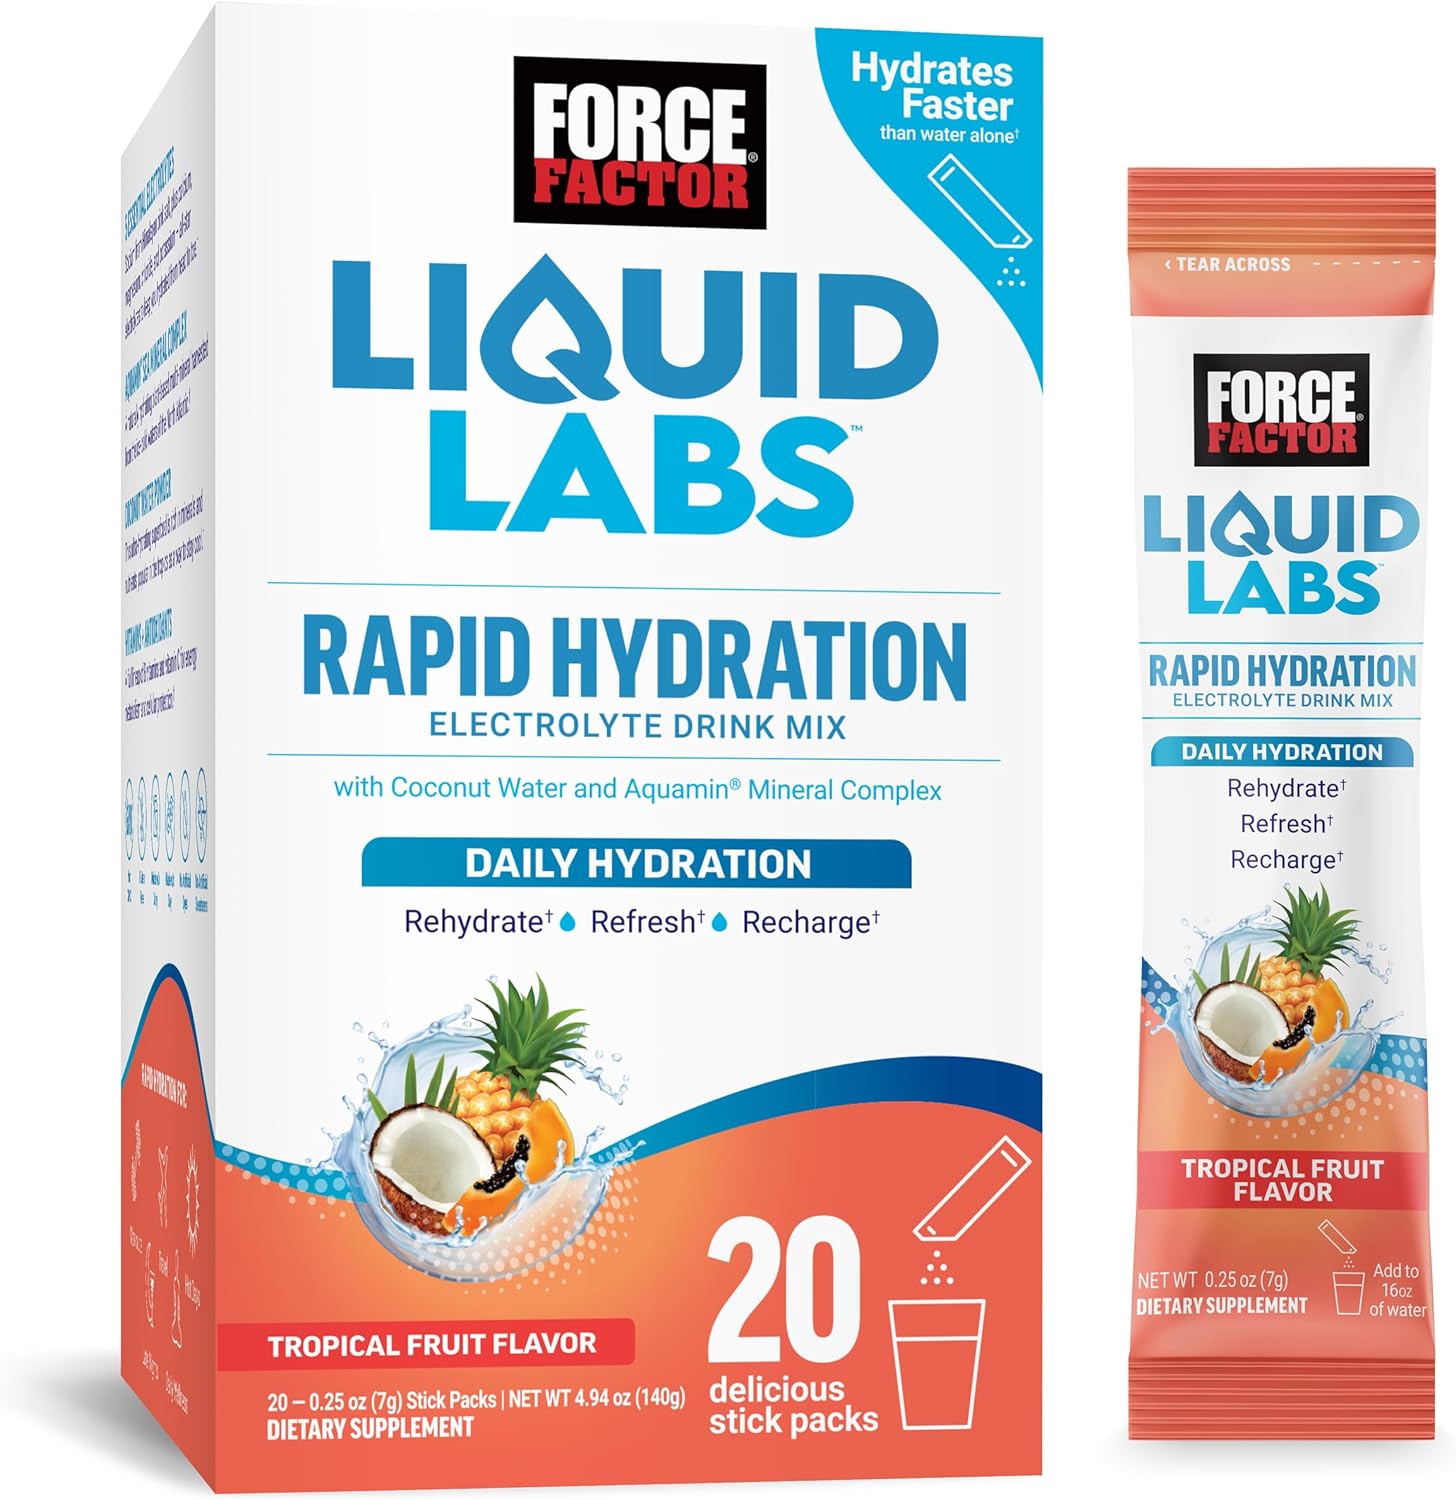 FORCE FACTOR Liquid Labs Electrolytes Powder, Hydration Packets to Make Electrolyte Water with 5 Essential Electrolytes, Vitamins, Minerals, and Antioxidants, Tropical Fruit Flavor, 20 Stick Packs